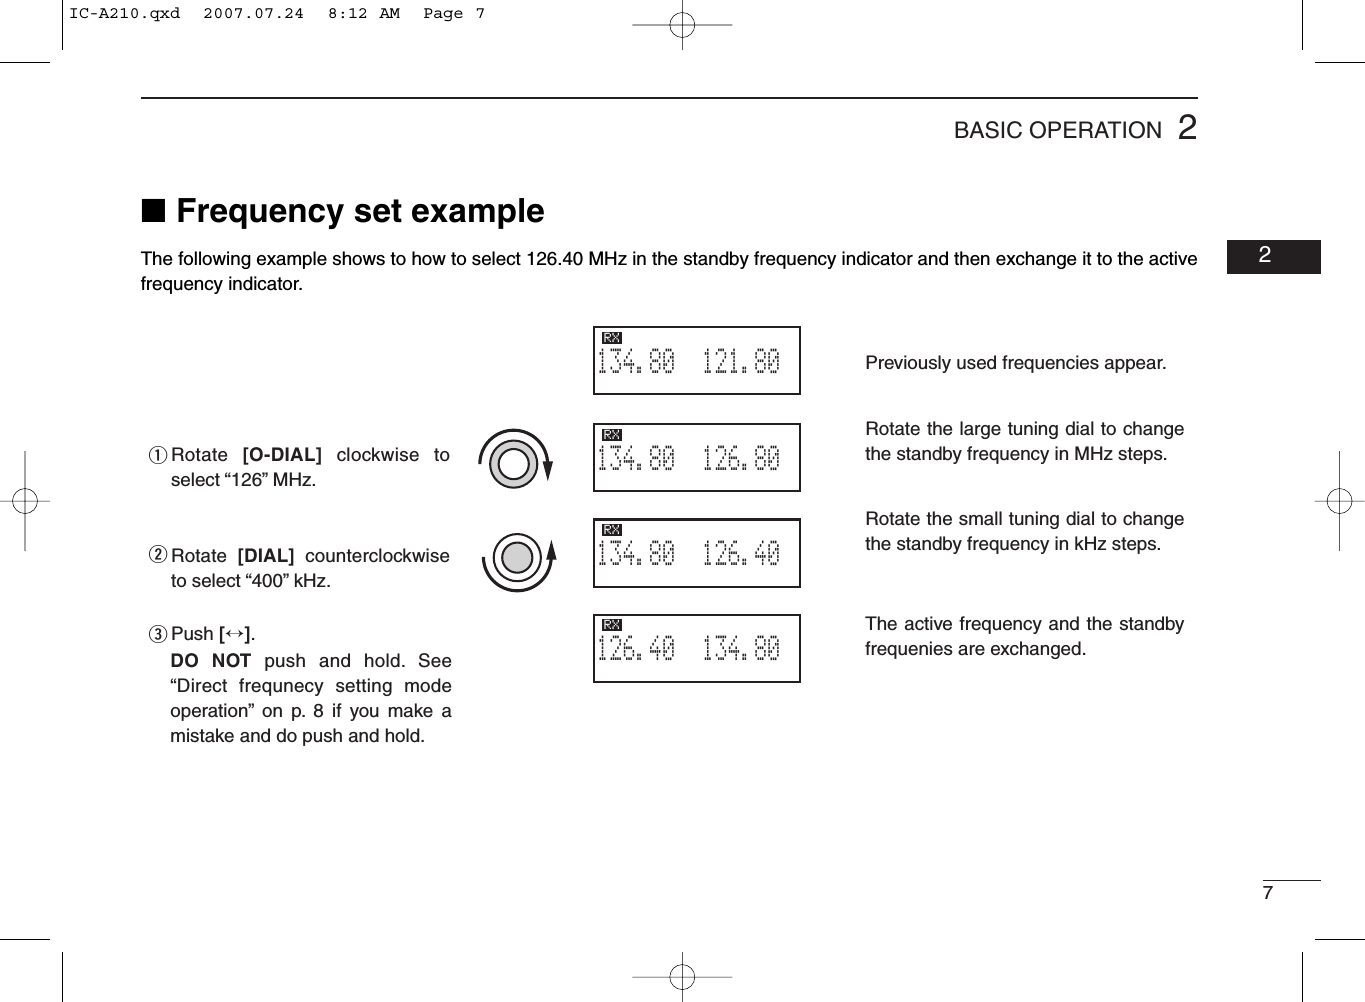 72BASIC OPERATION02■Frequency set exampleThe following example shows to how to select 126.40 MHz in the standby frequency indicator and then exchange it to the activefrequency indicator.qweThe active frequency and the standby frequenies are exchanged.Previously used frequencies appear.Rotate the large tuning dial to change the standby frequency in MHz steps.Rotate the small tuning dial to change the standby frequency in kHz steps.121.805134.80RX126.805134.80RX126.405134.80RX134.805126.40RXRotate  [O-DIAL] clockwise to select “126” MHz.Rotate  [DIAL]  counterclockwise to select “400” kHz.Push [↔].DO NOT push and hold. See “Direct frequnecy setting mode operation” on p. 8 if you make a mistake and do push and hold.IC-A210.qxd  2007.07.24  8:12 AM  Page 7